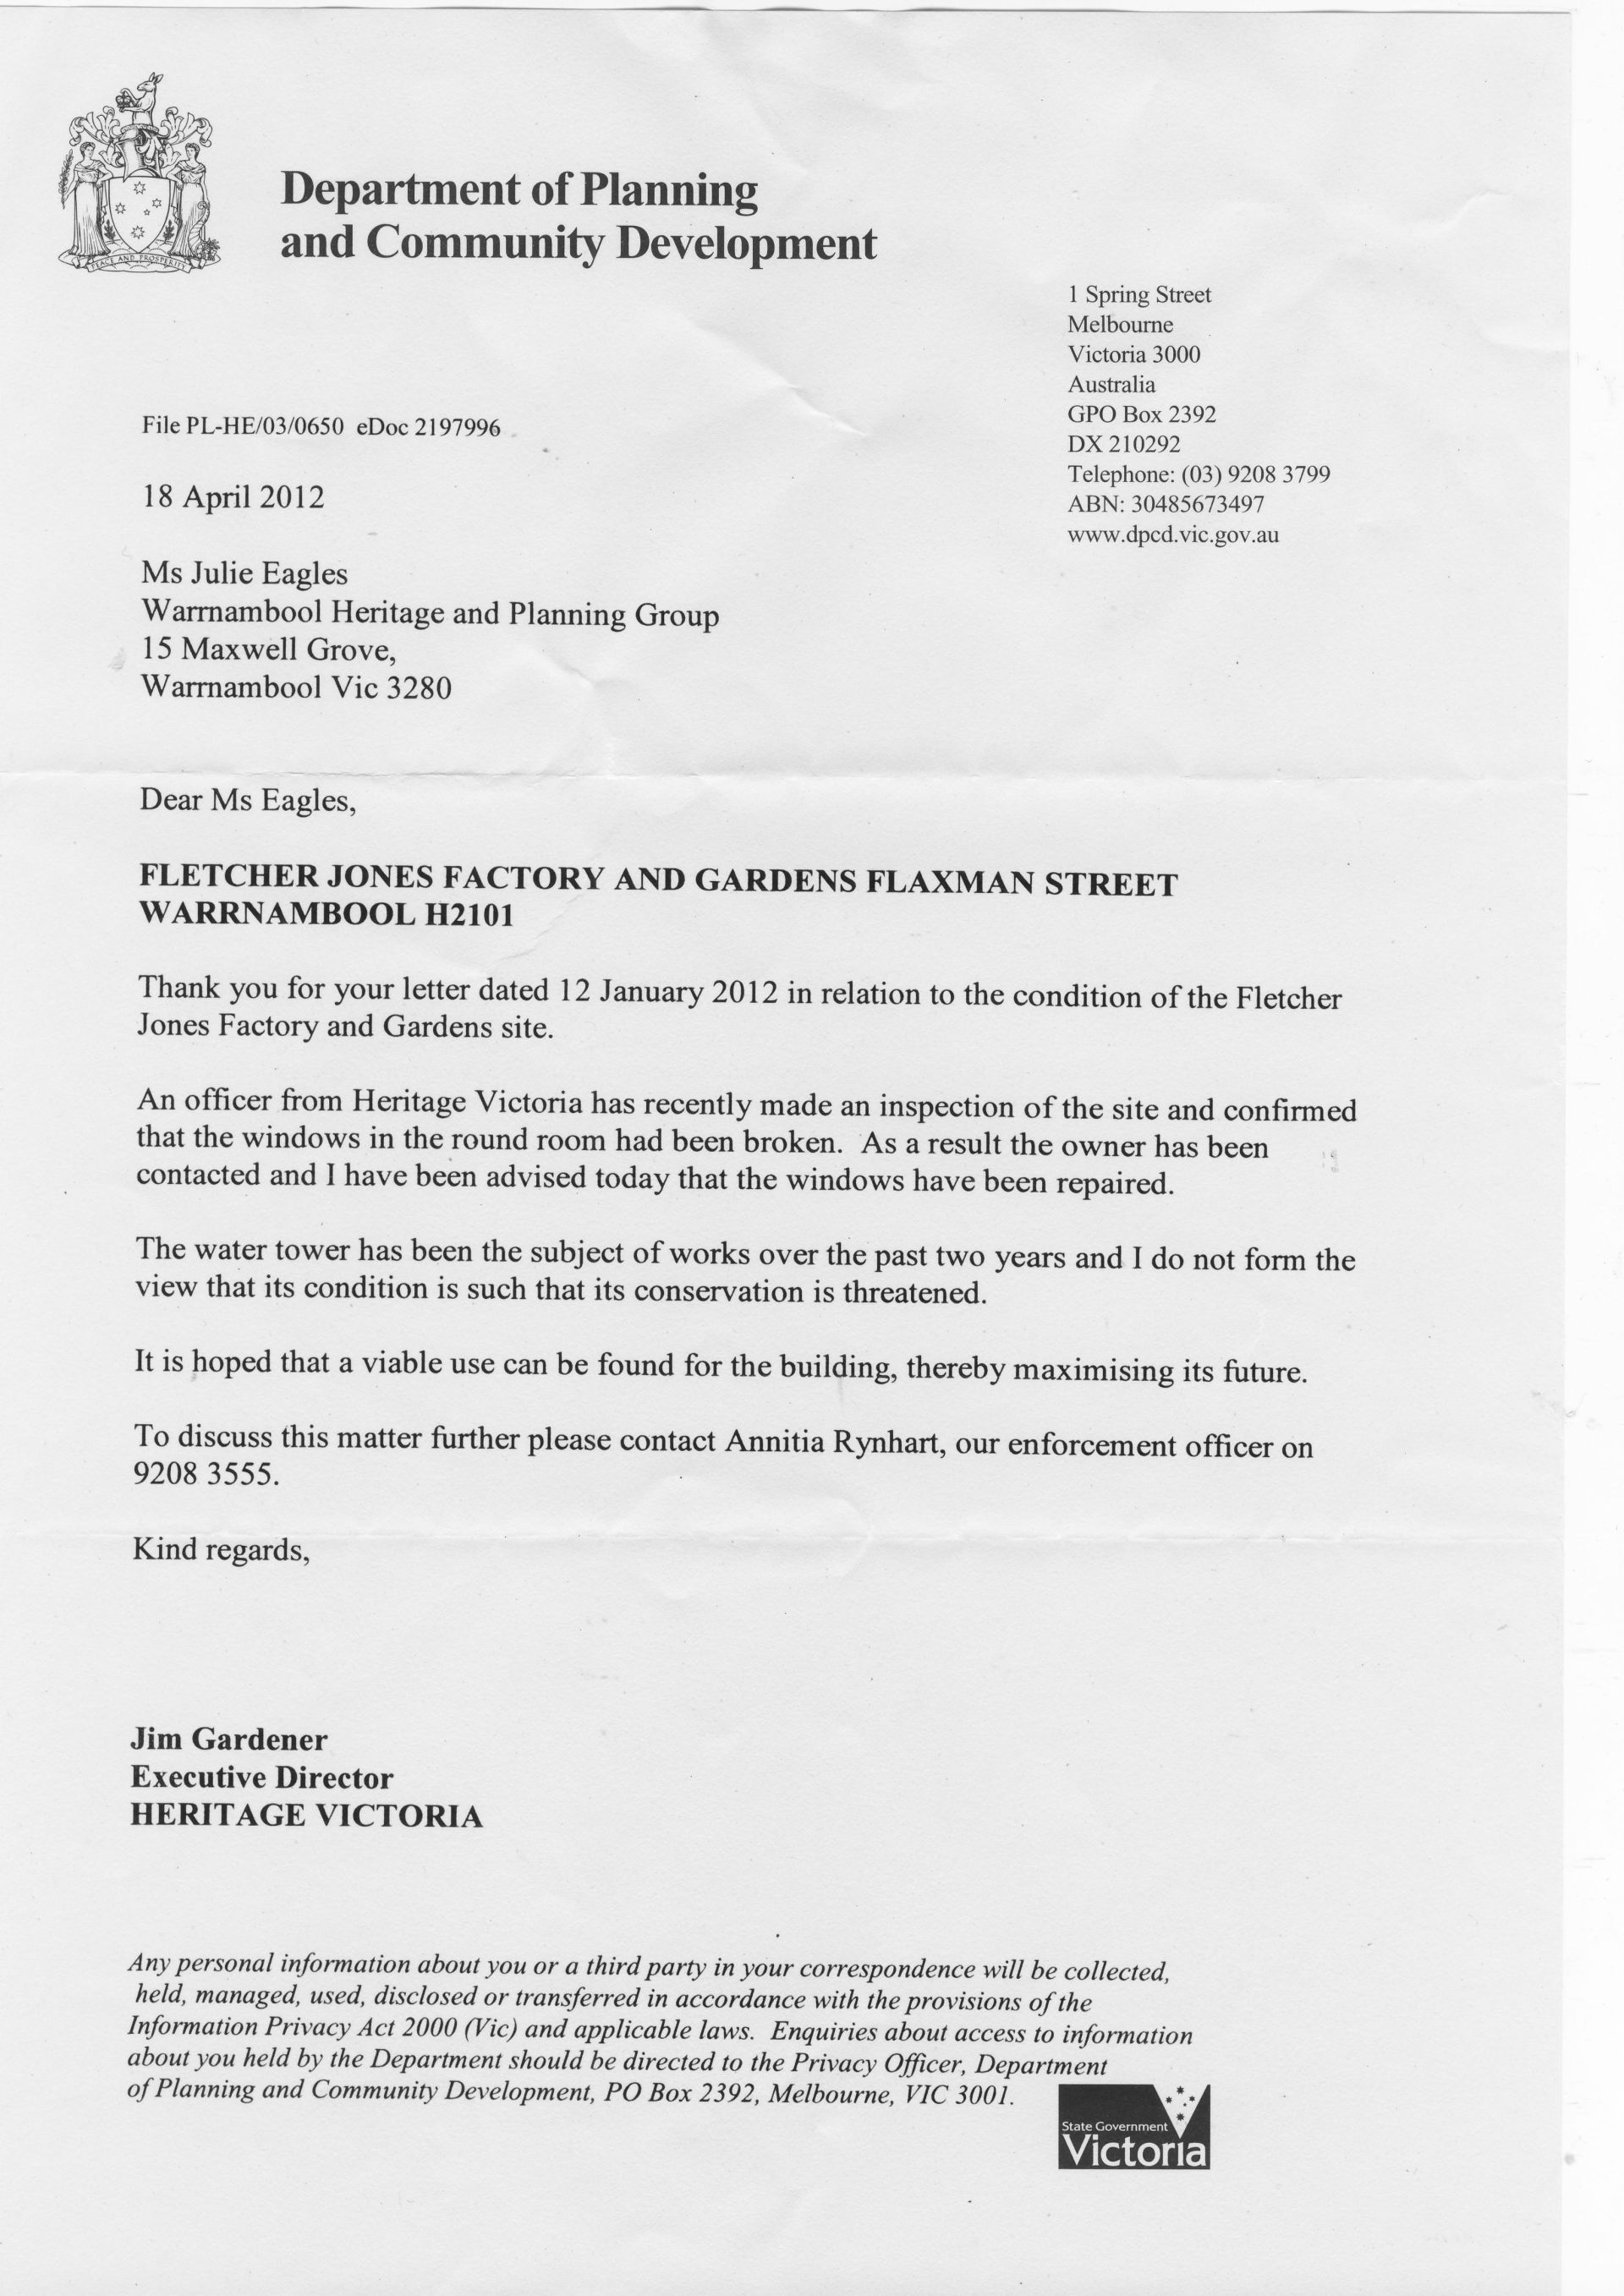 Heritage Victoria's response to one of WP&H letters (the WP&H letter this replies to is below in the document link).  The window referred to was in fact just boarded up and not repaired.  